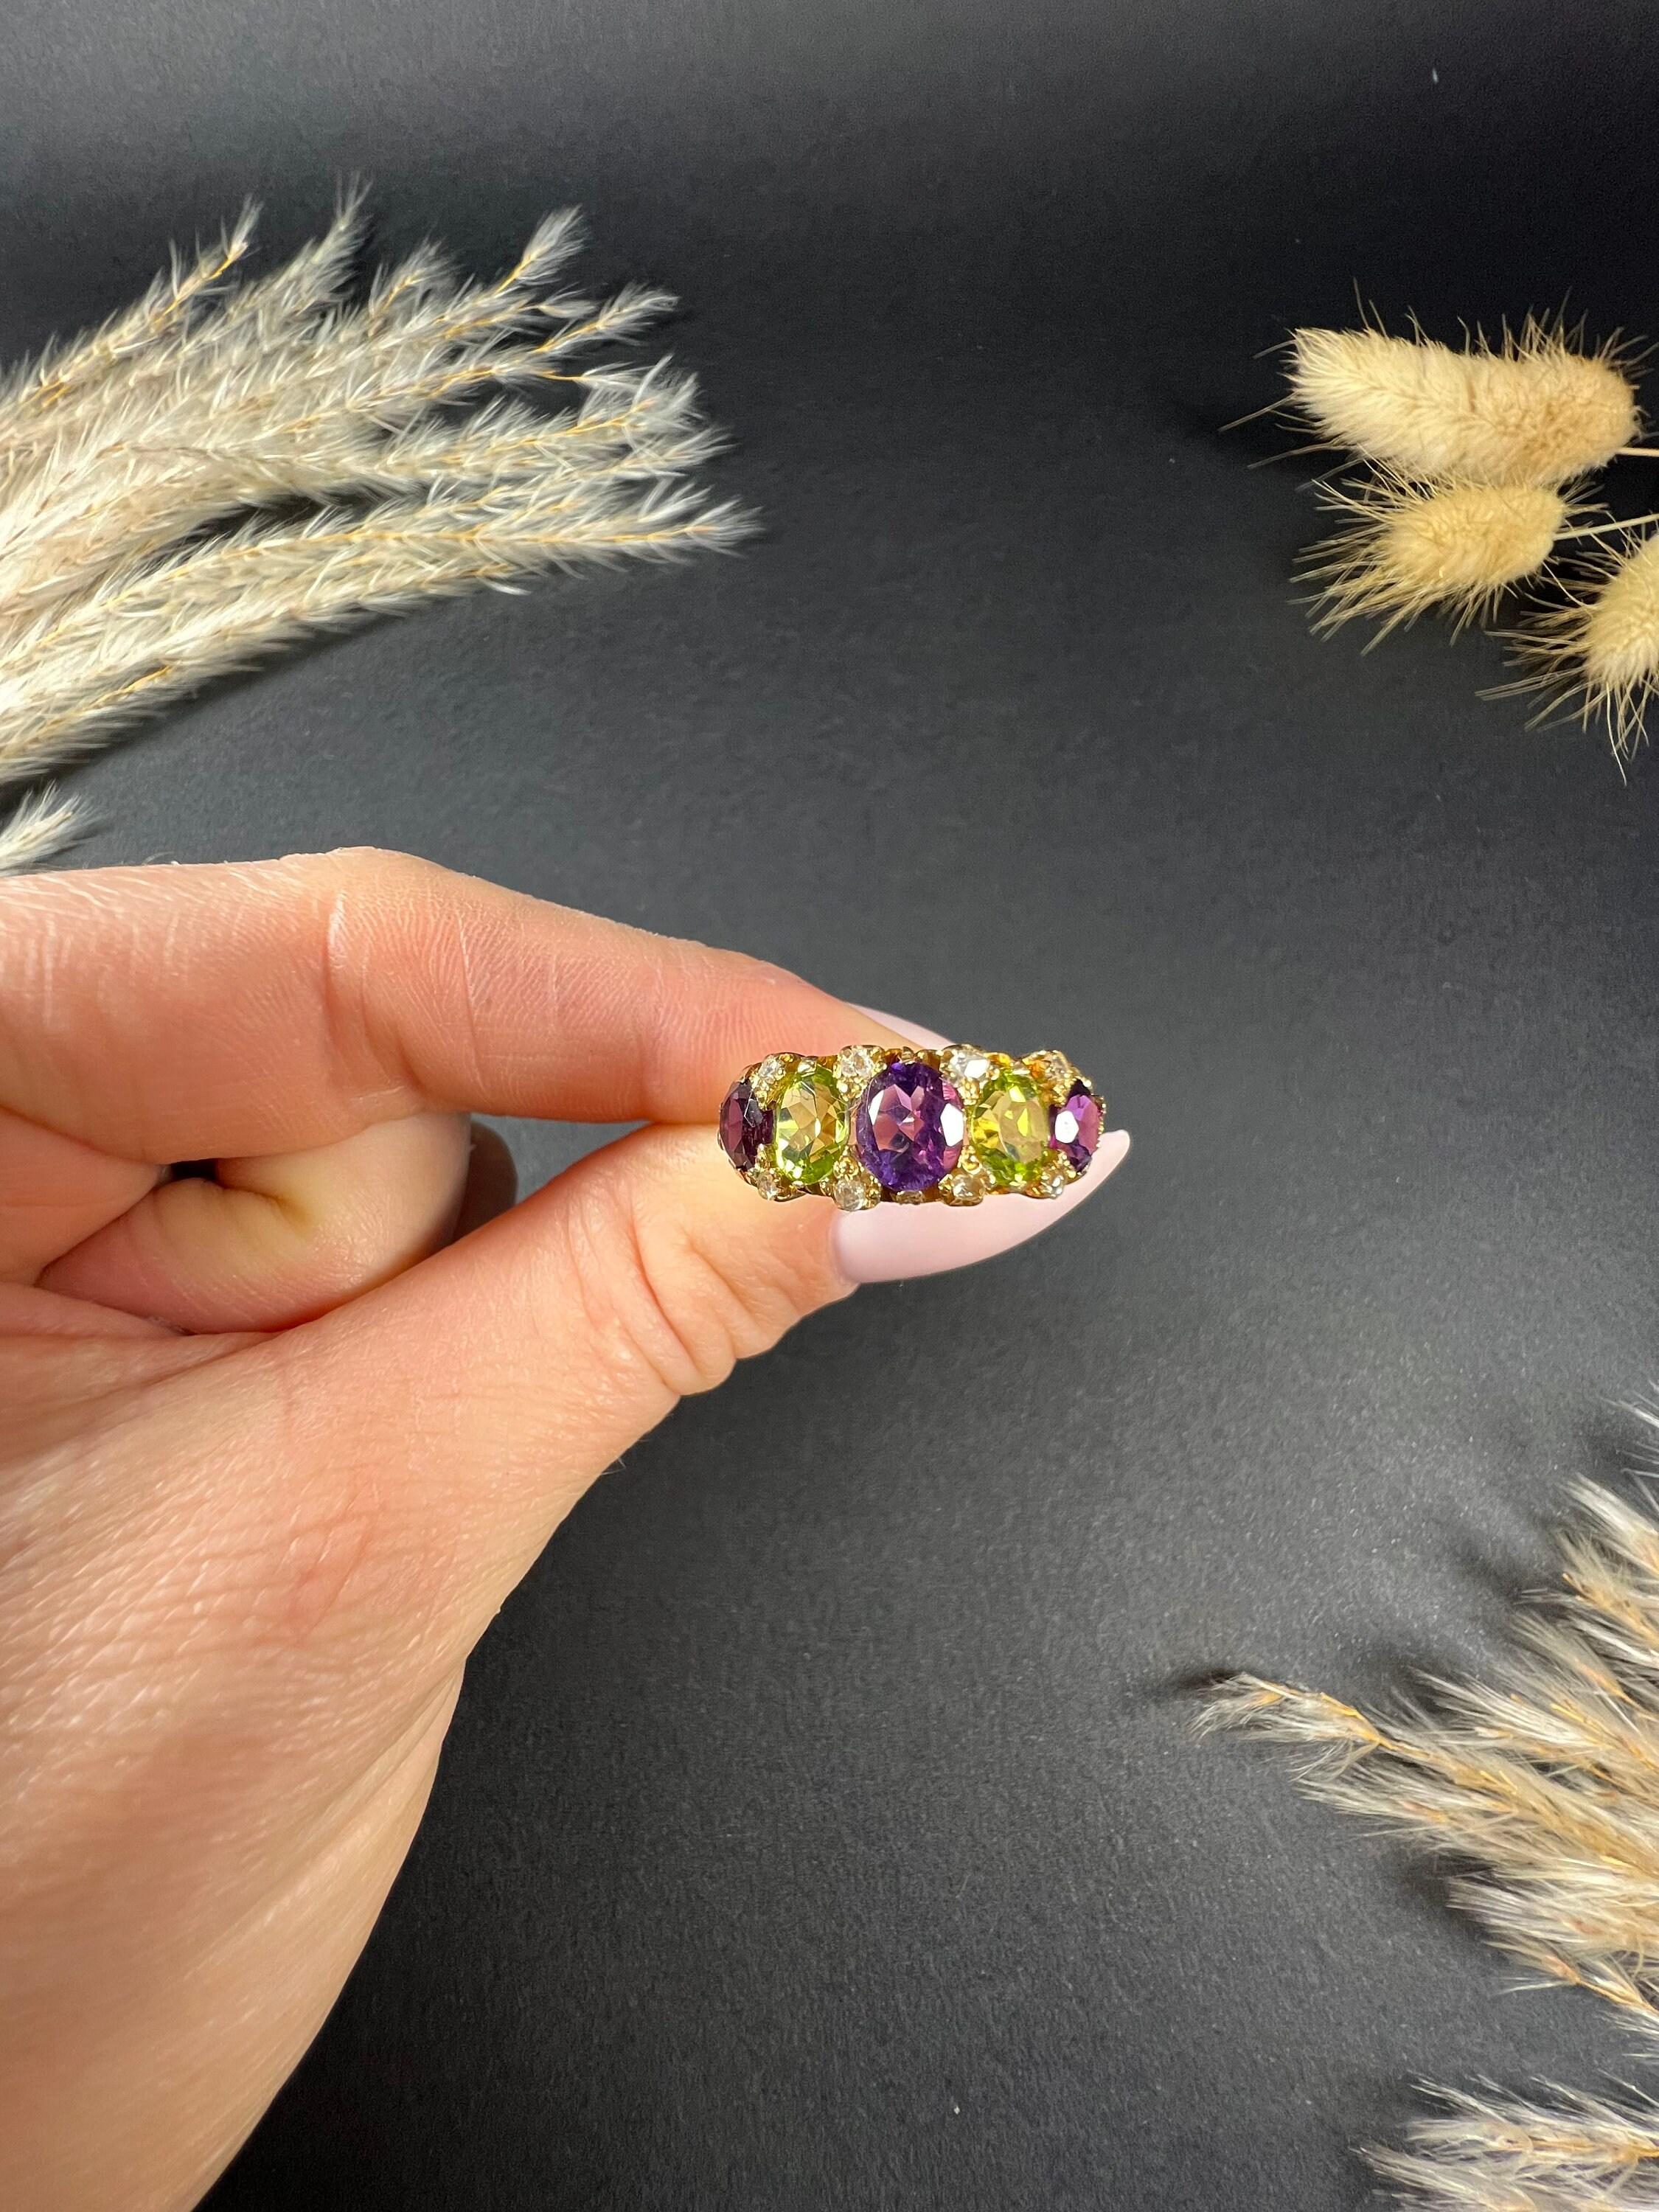 Antique Suffragette Ring 

18ct Gold Tested

This beautiful Edwardian suffragette ring is a true testament to the elegance and style of the era. Made from 18ct yellow gold, it features exquisite amethysts, peridots, and rose-cut diamonds that